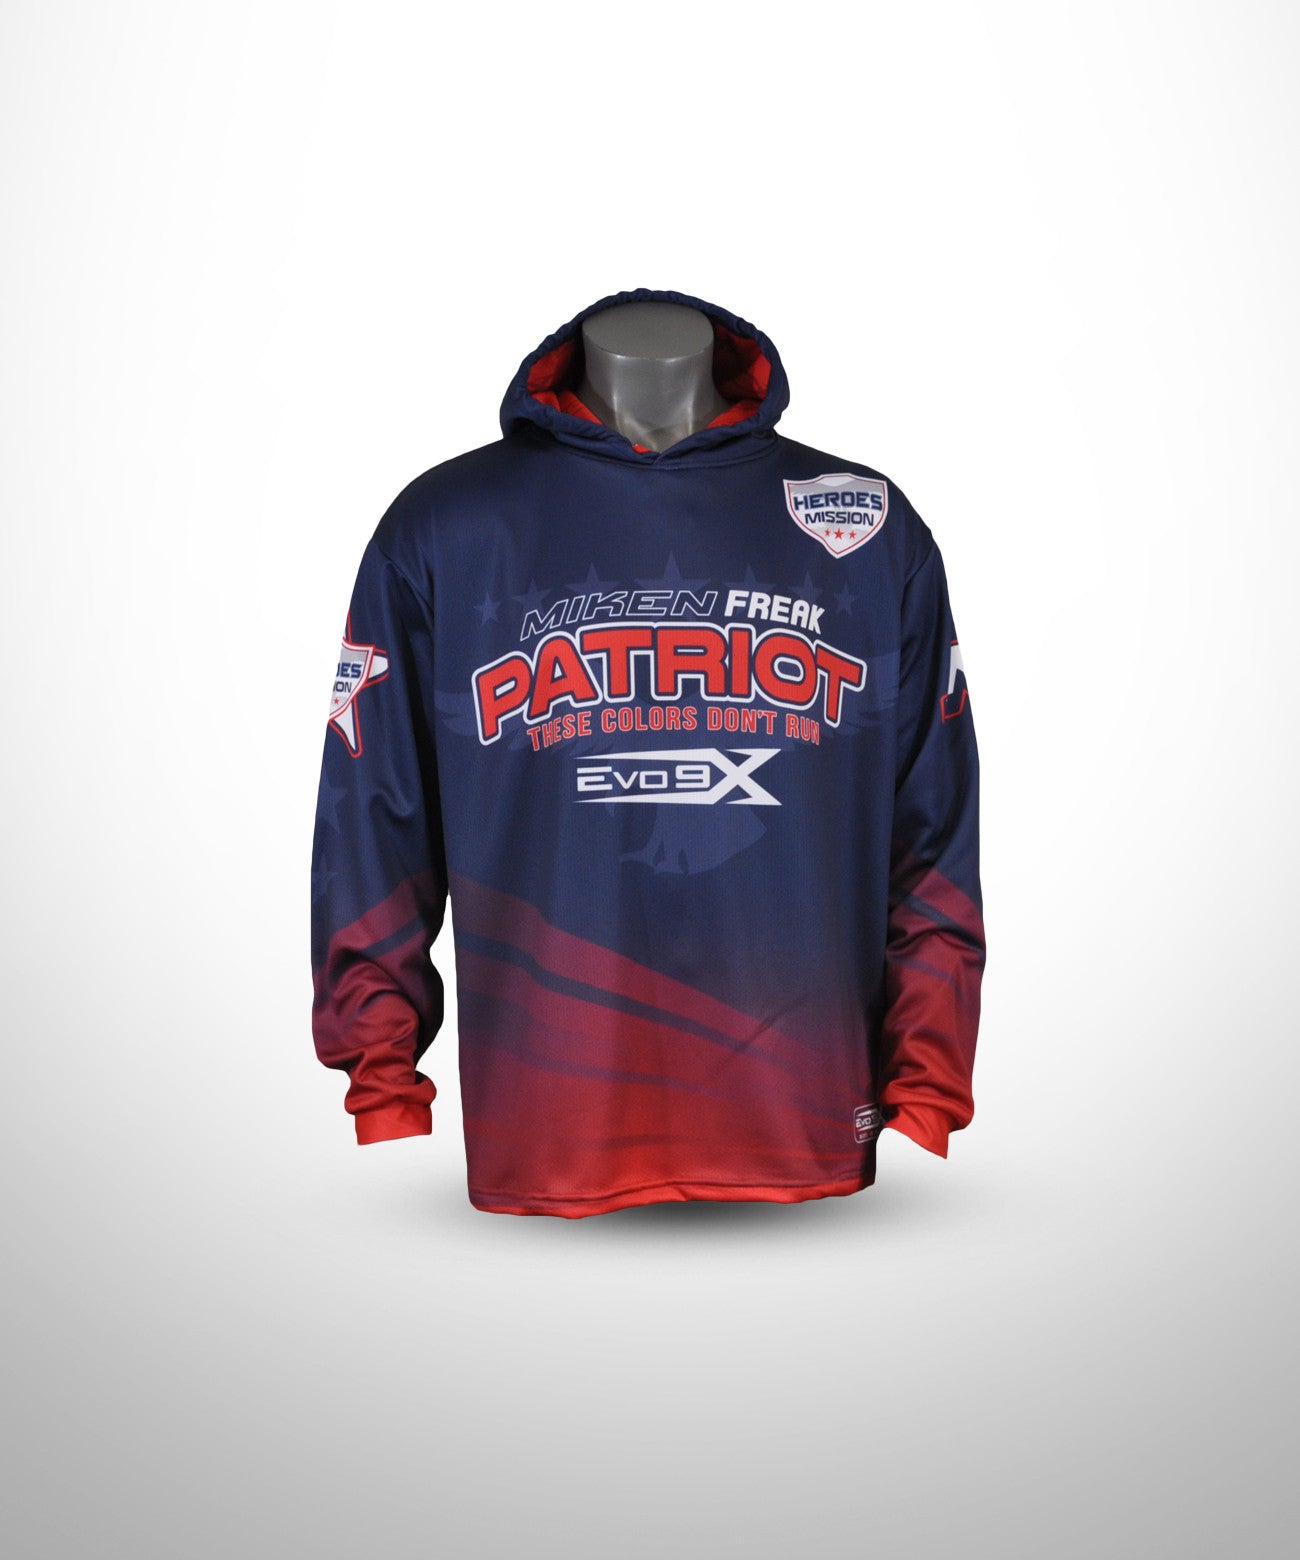 Full Dye Sublimated Hoodie NVY RED PATRIOT